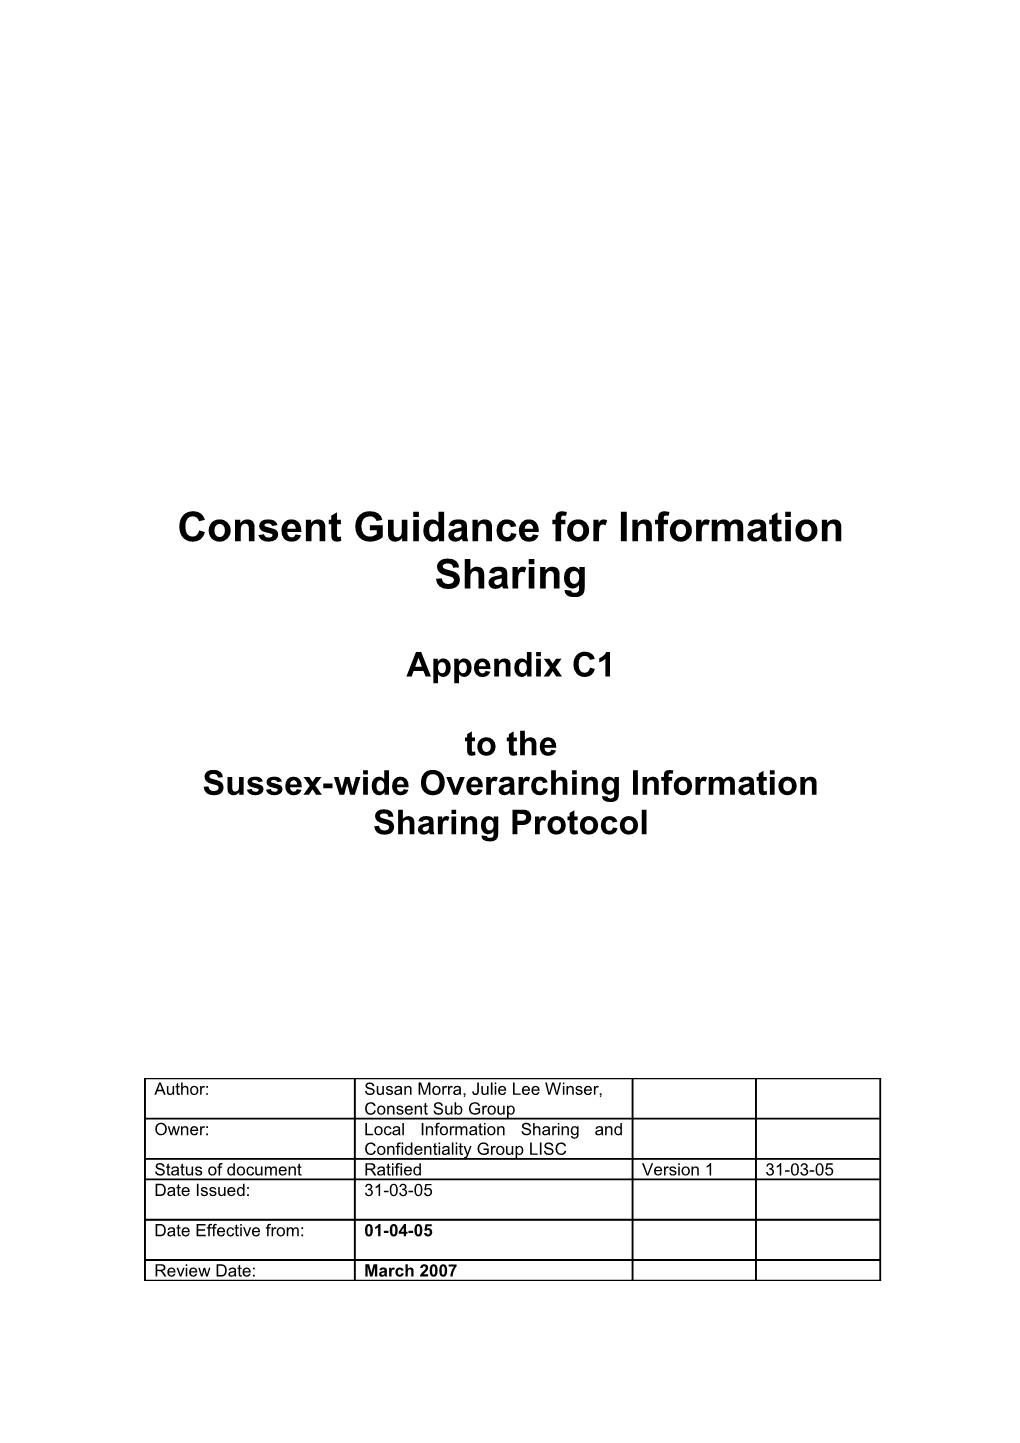 Consent Guidance for Information Sharing